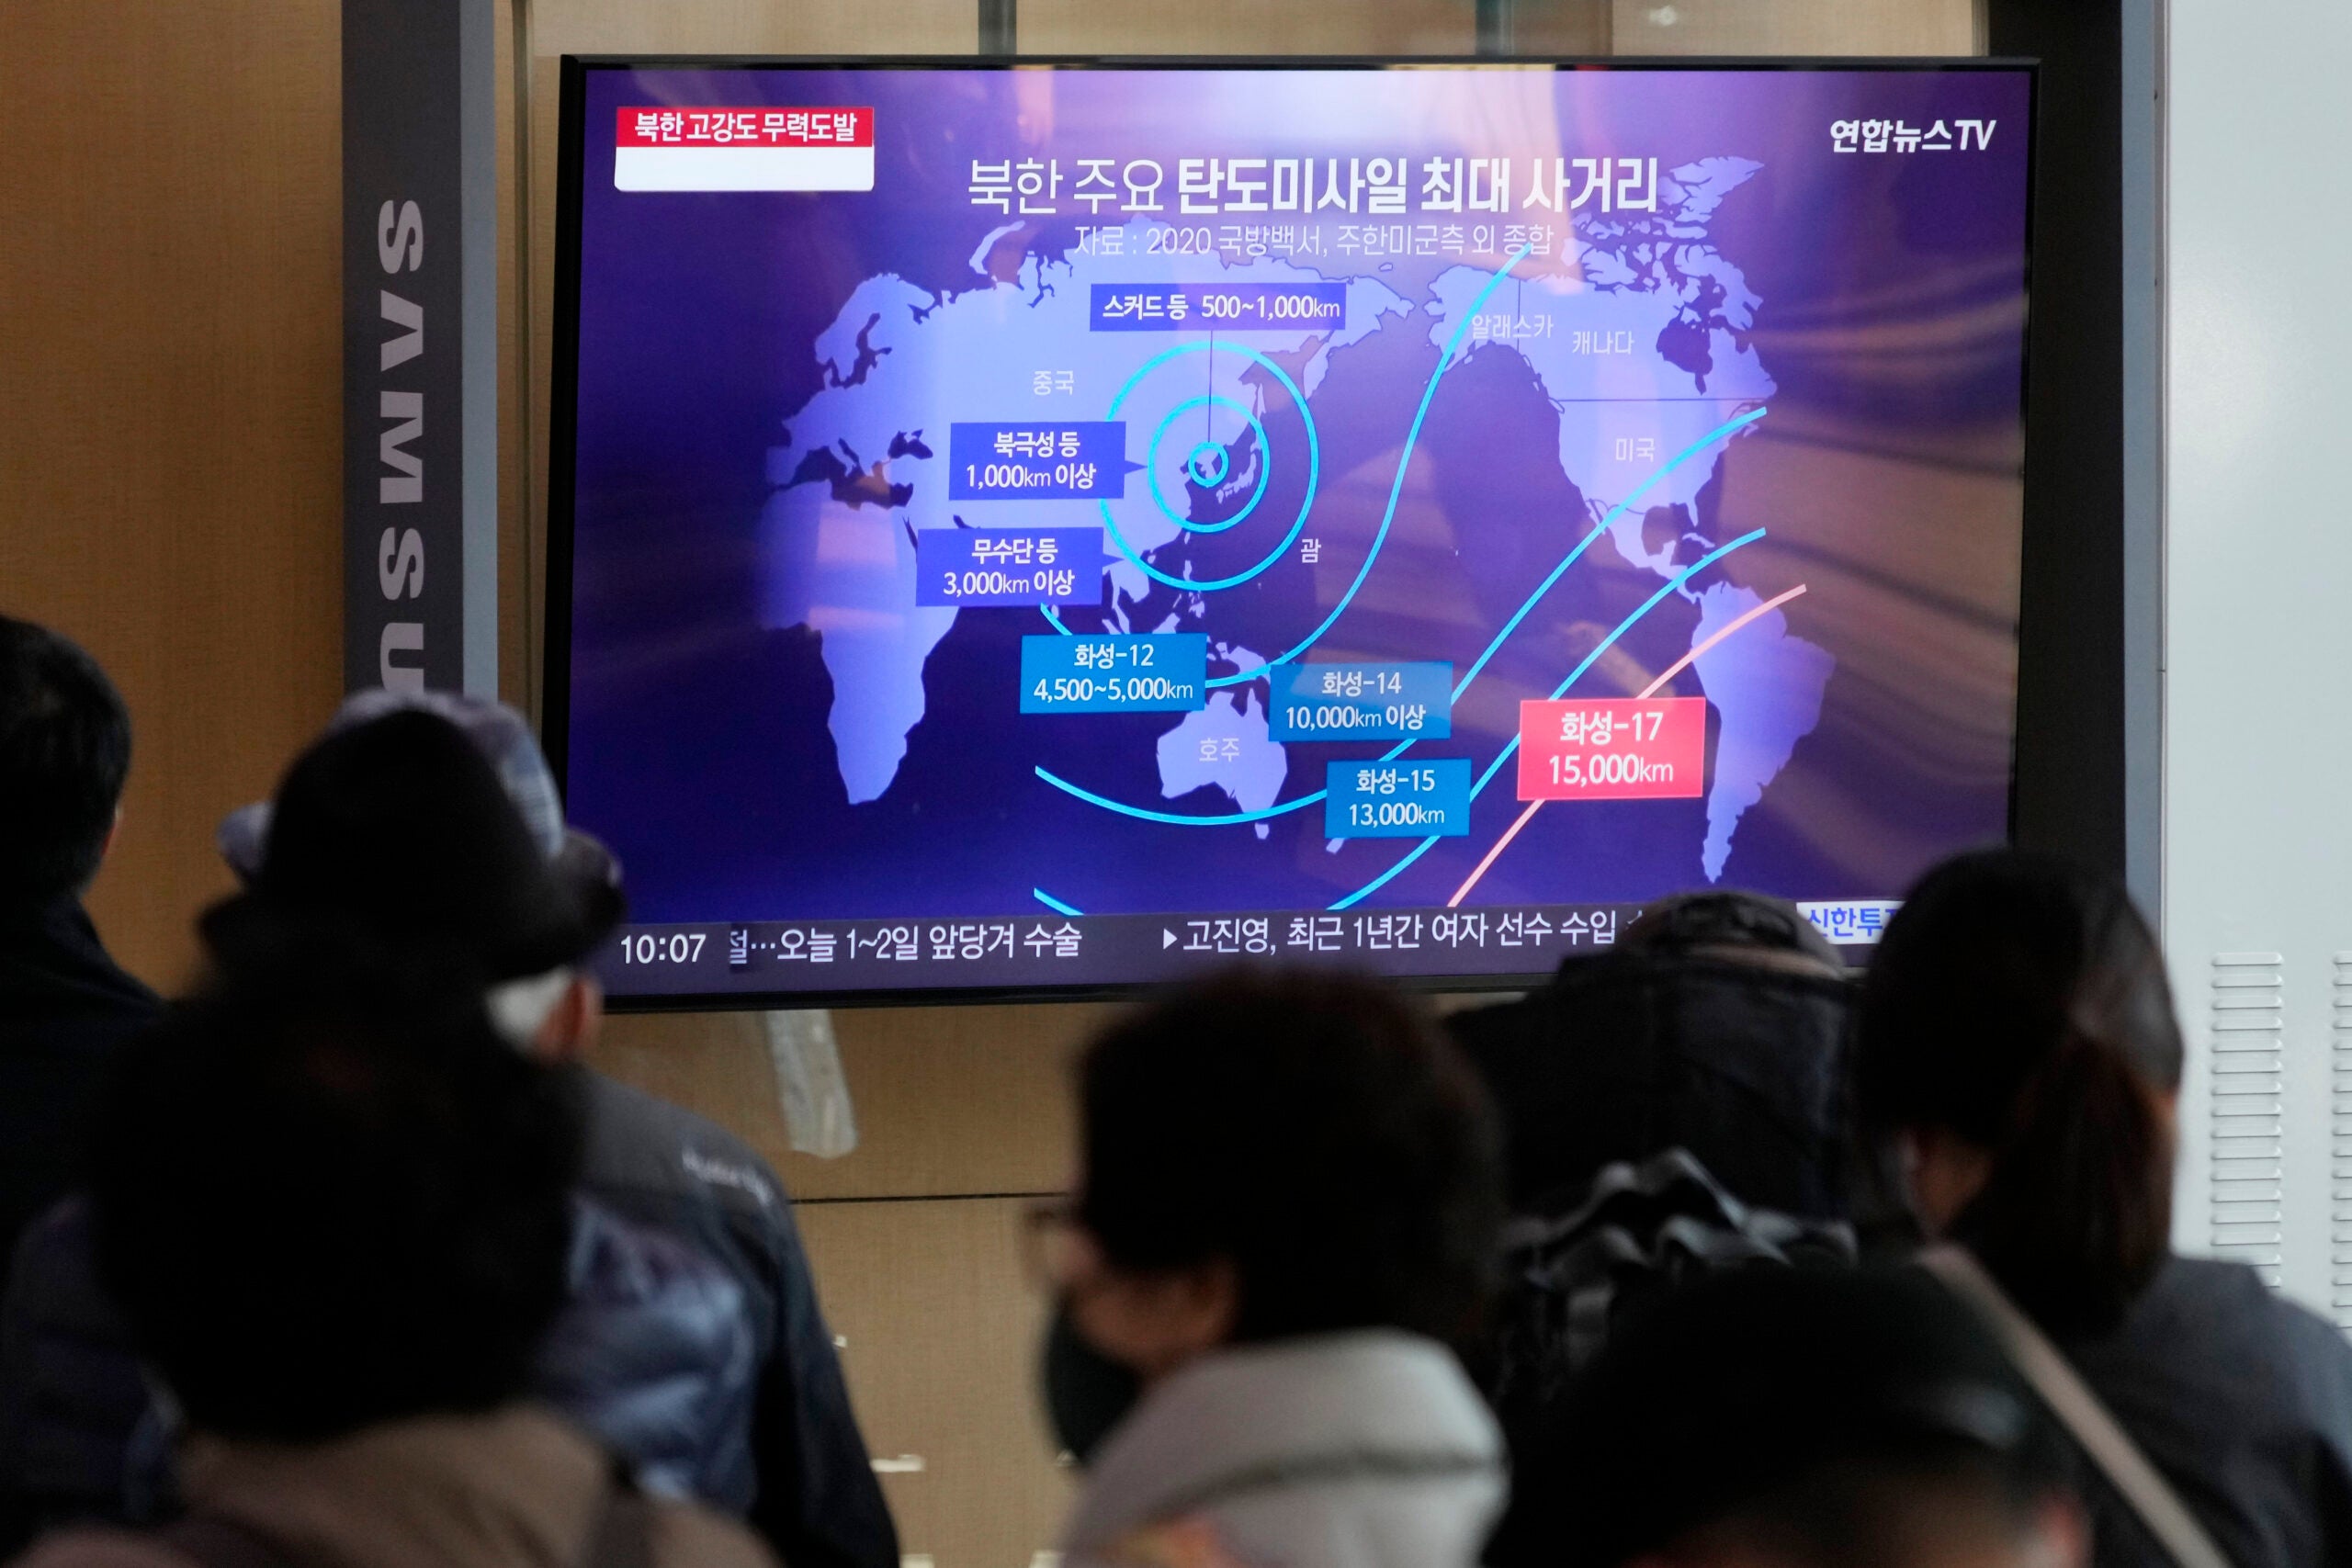 North Korea says recent missile tests were practice to ‘mercilessly’ strike US air bases